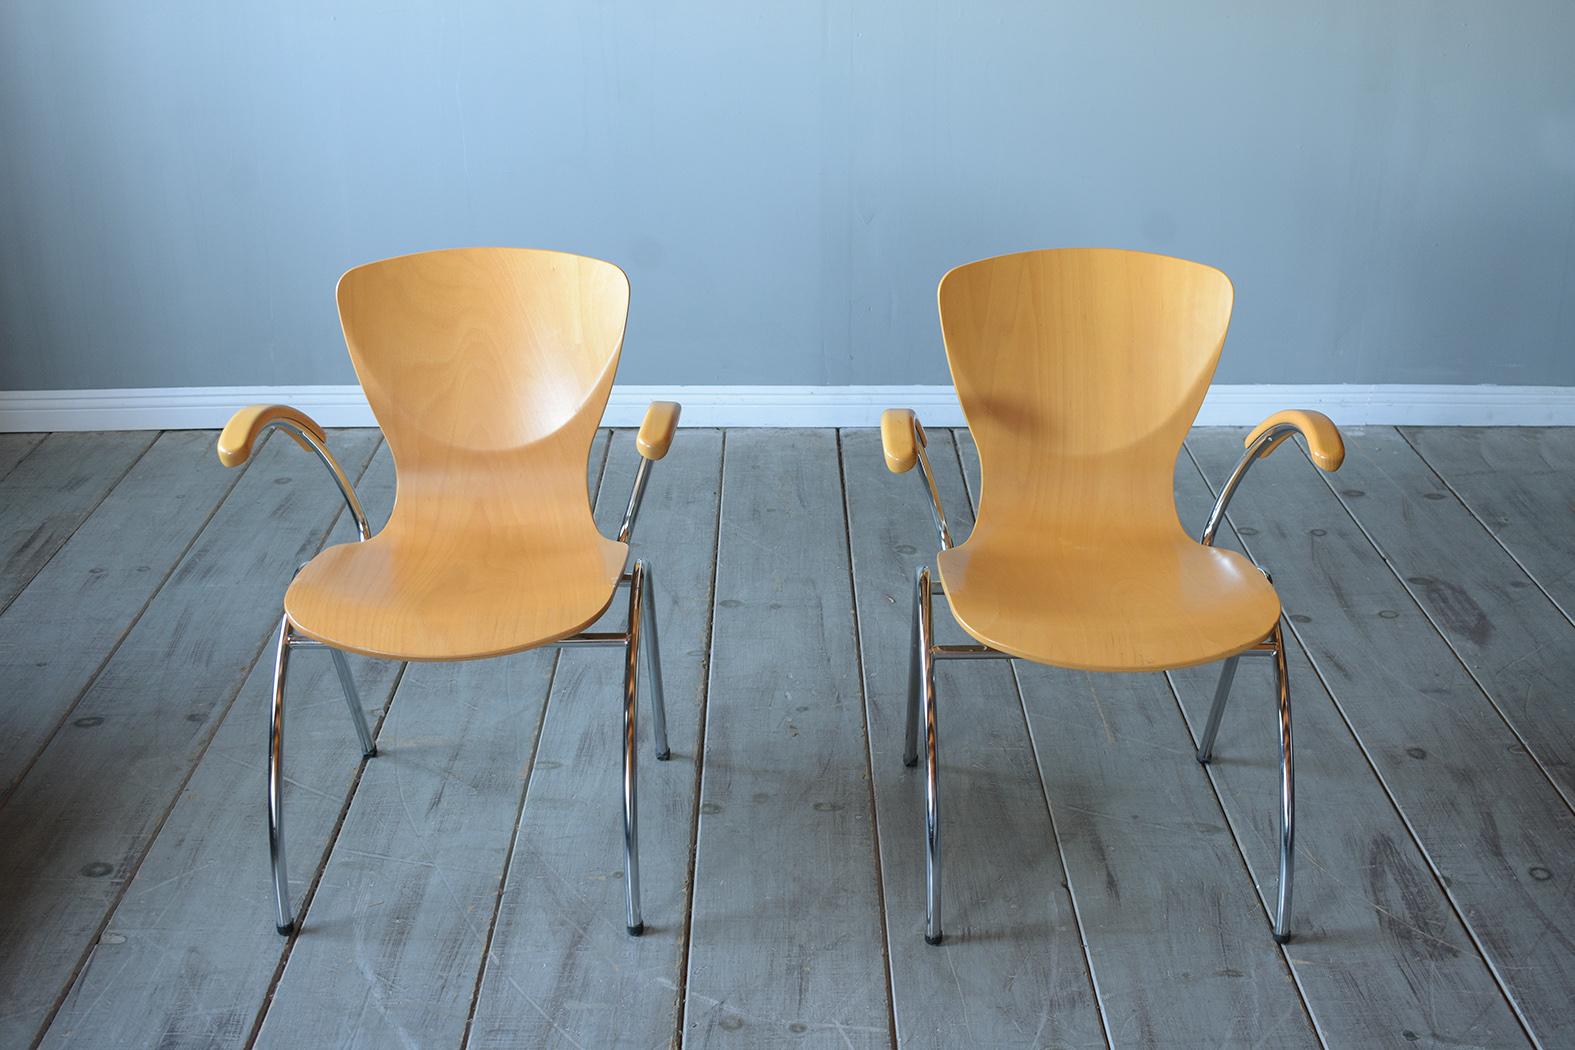 American 21st-Century Mid-Century Modern Dining Chairs: Set of Six For Sale